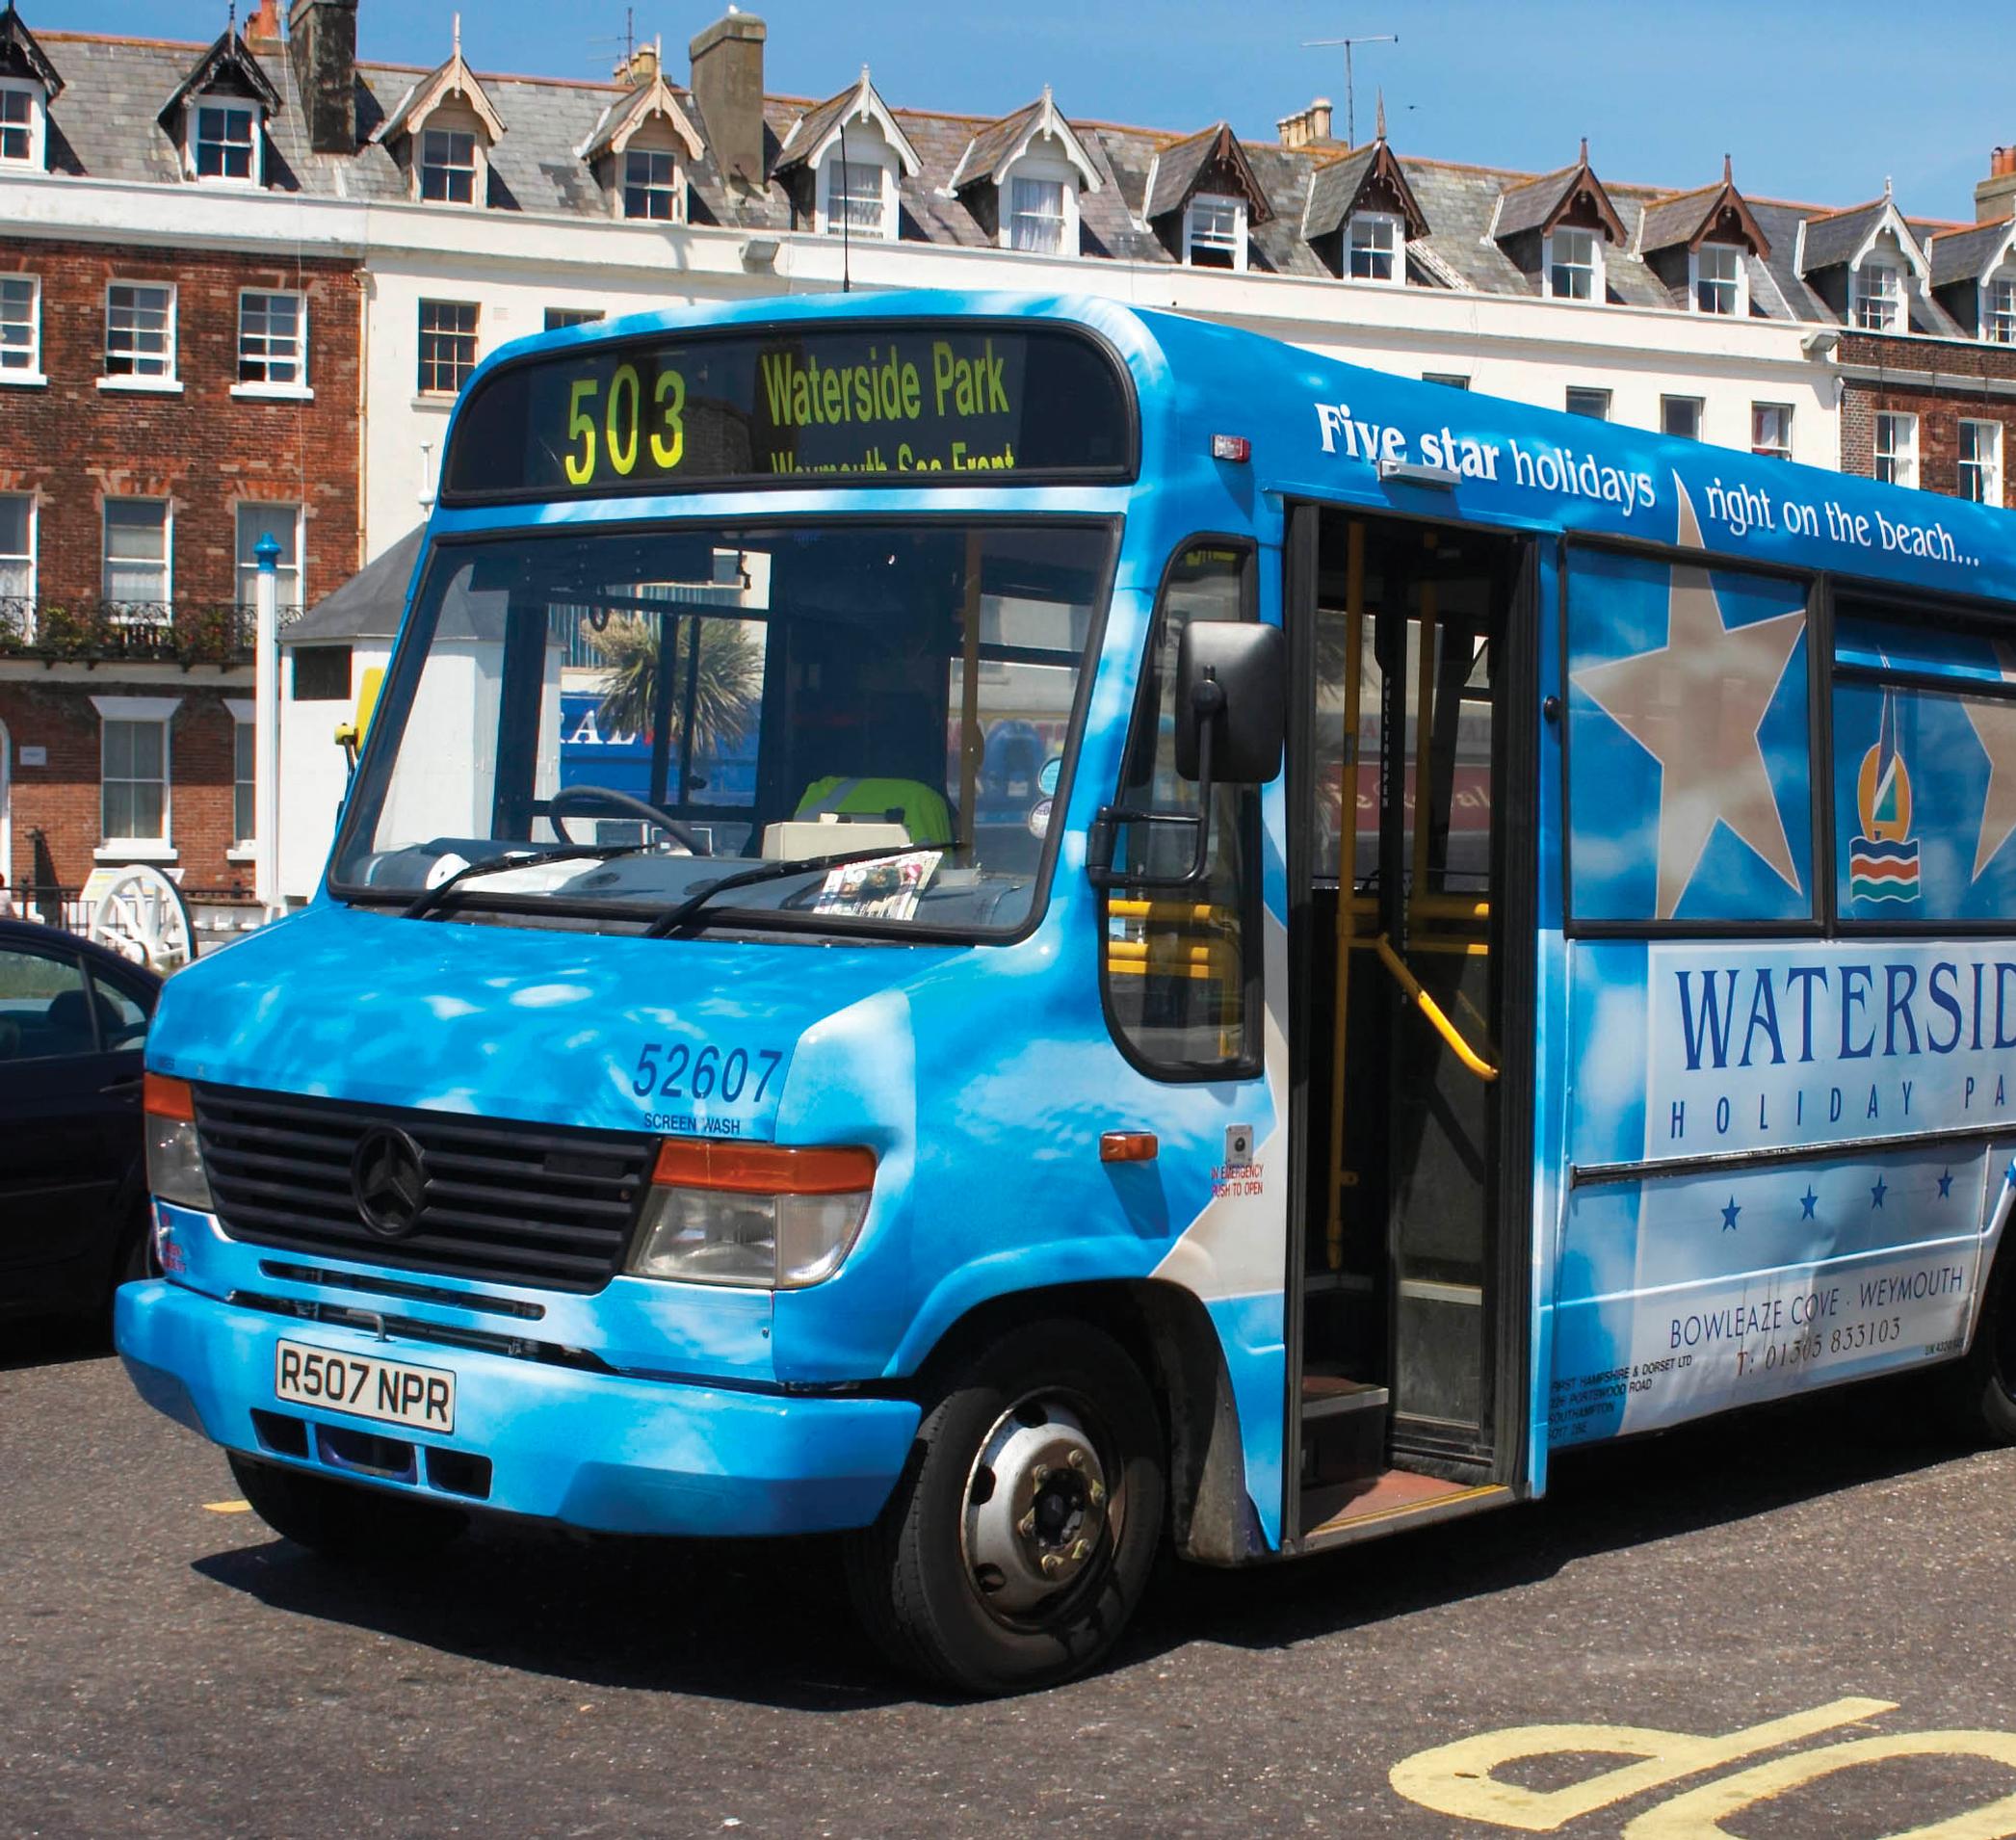 This type of step-entrance bus, seen in 2006, has been observed on public services in two English towns recently